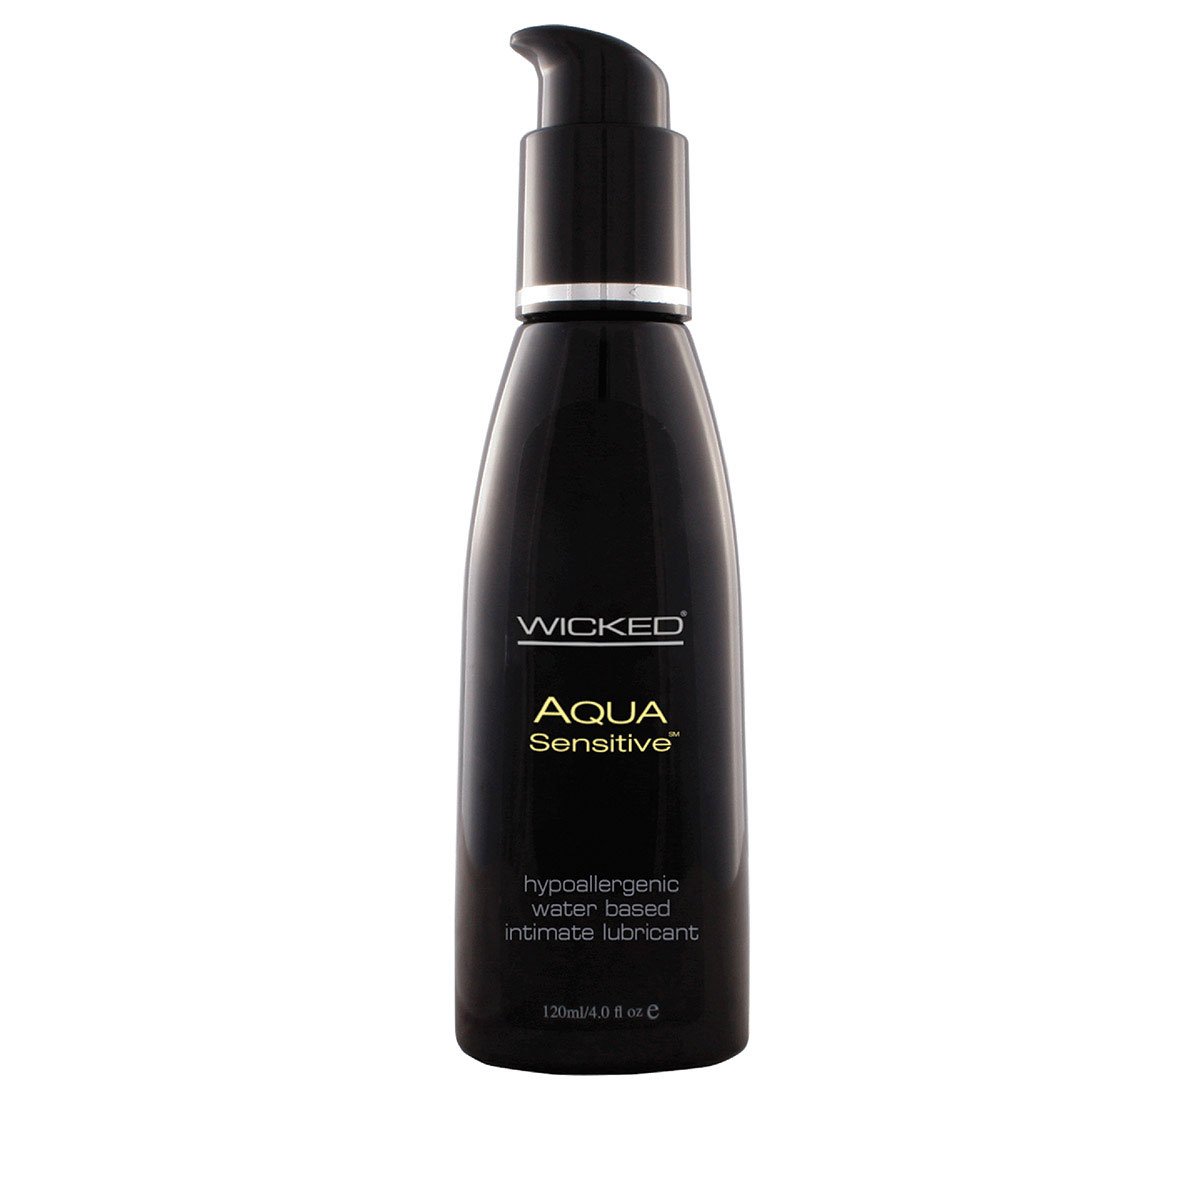 Wicked Aqua Sensitive - Buy At Luxury Toy X - Free 3-Day Shipping